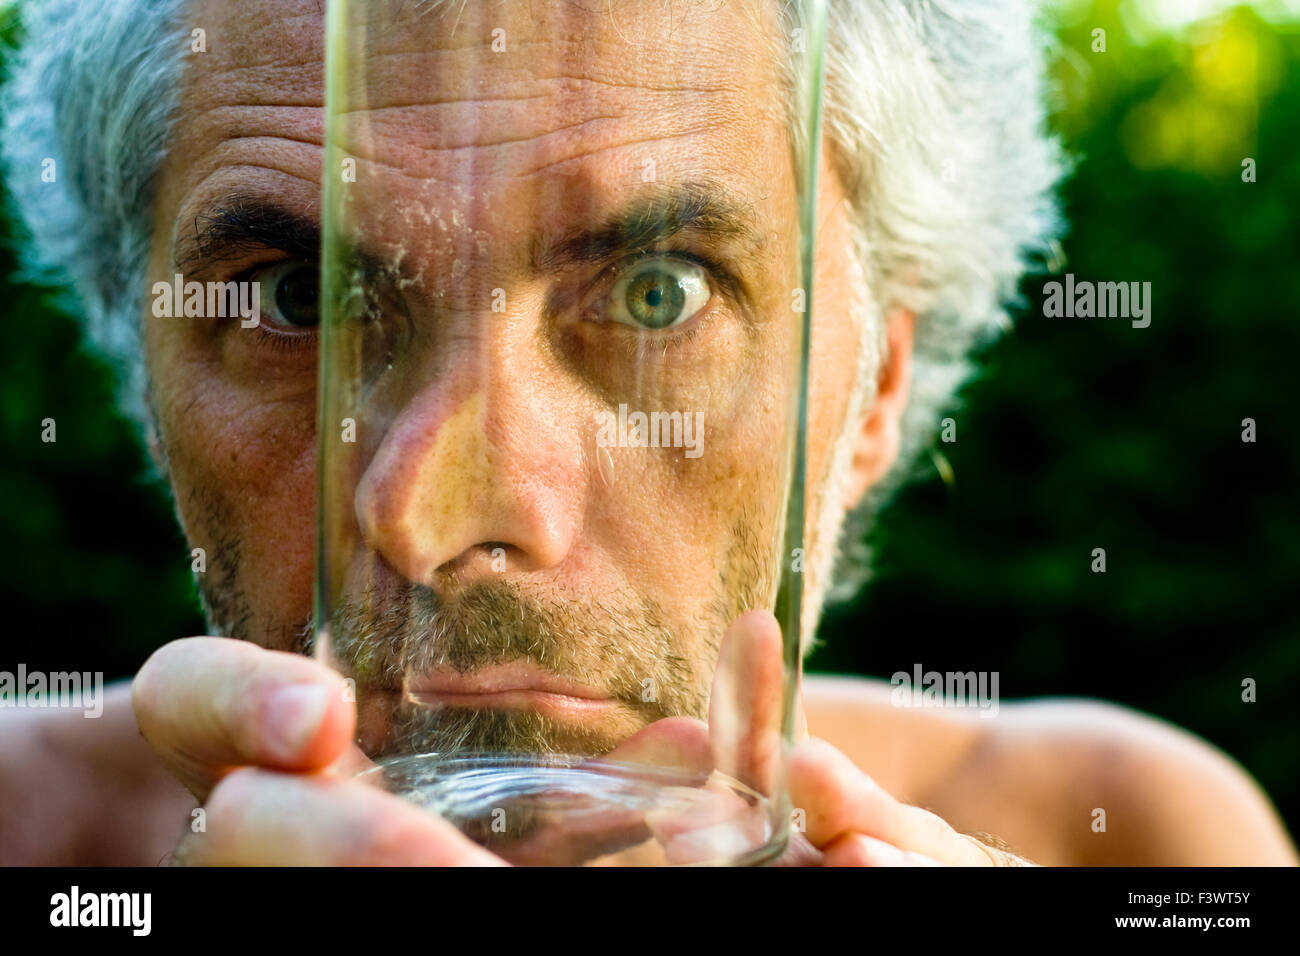 Face behind glass Stock Photo